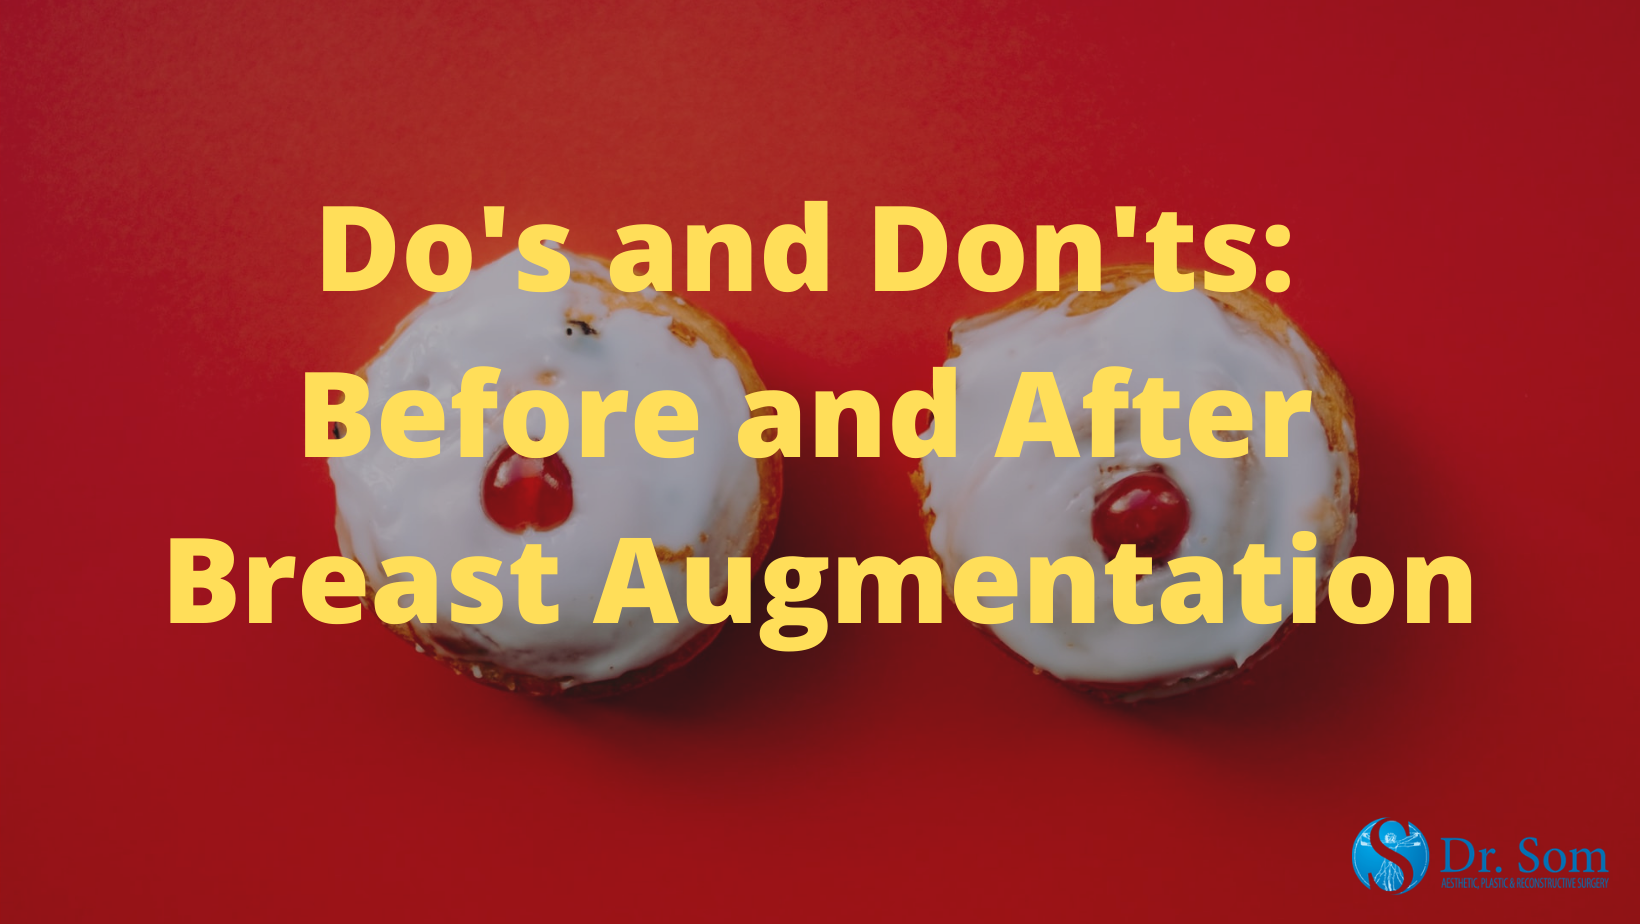 Do's and Don'ts: Before and After Breast Augmentation - Dr. Som